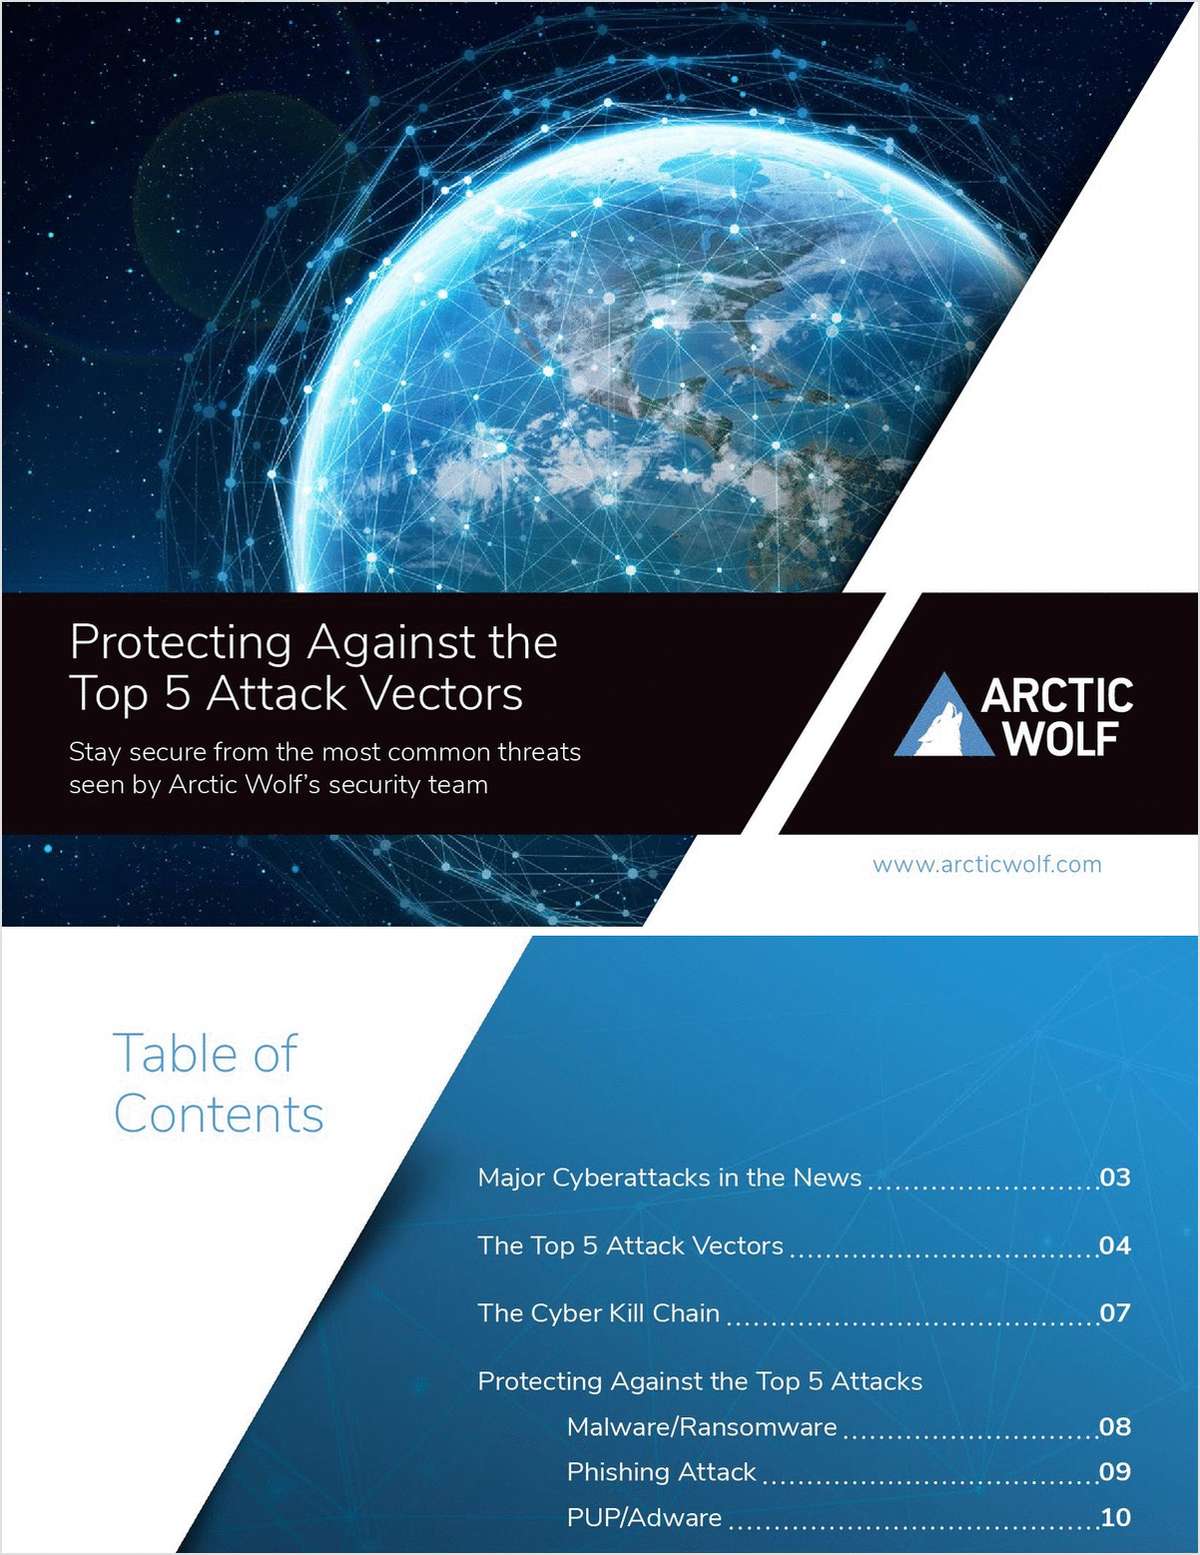 Protecting Against the Top 5 Attack Vectors